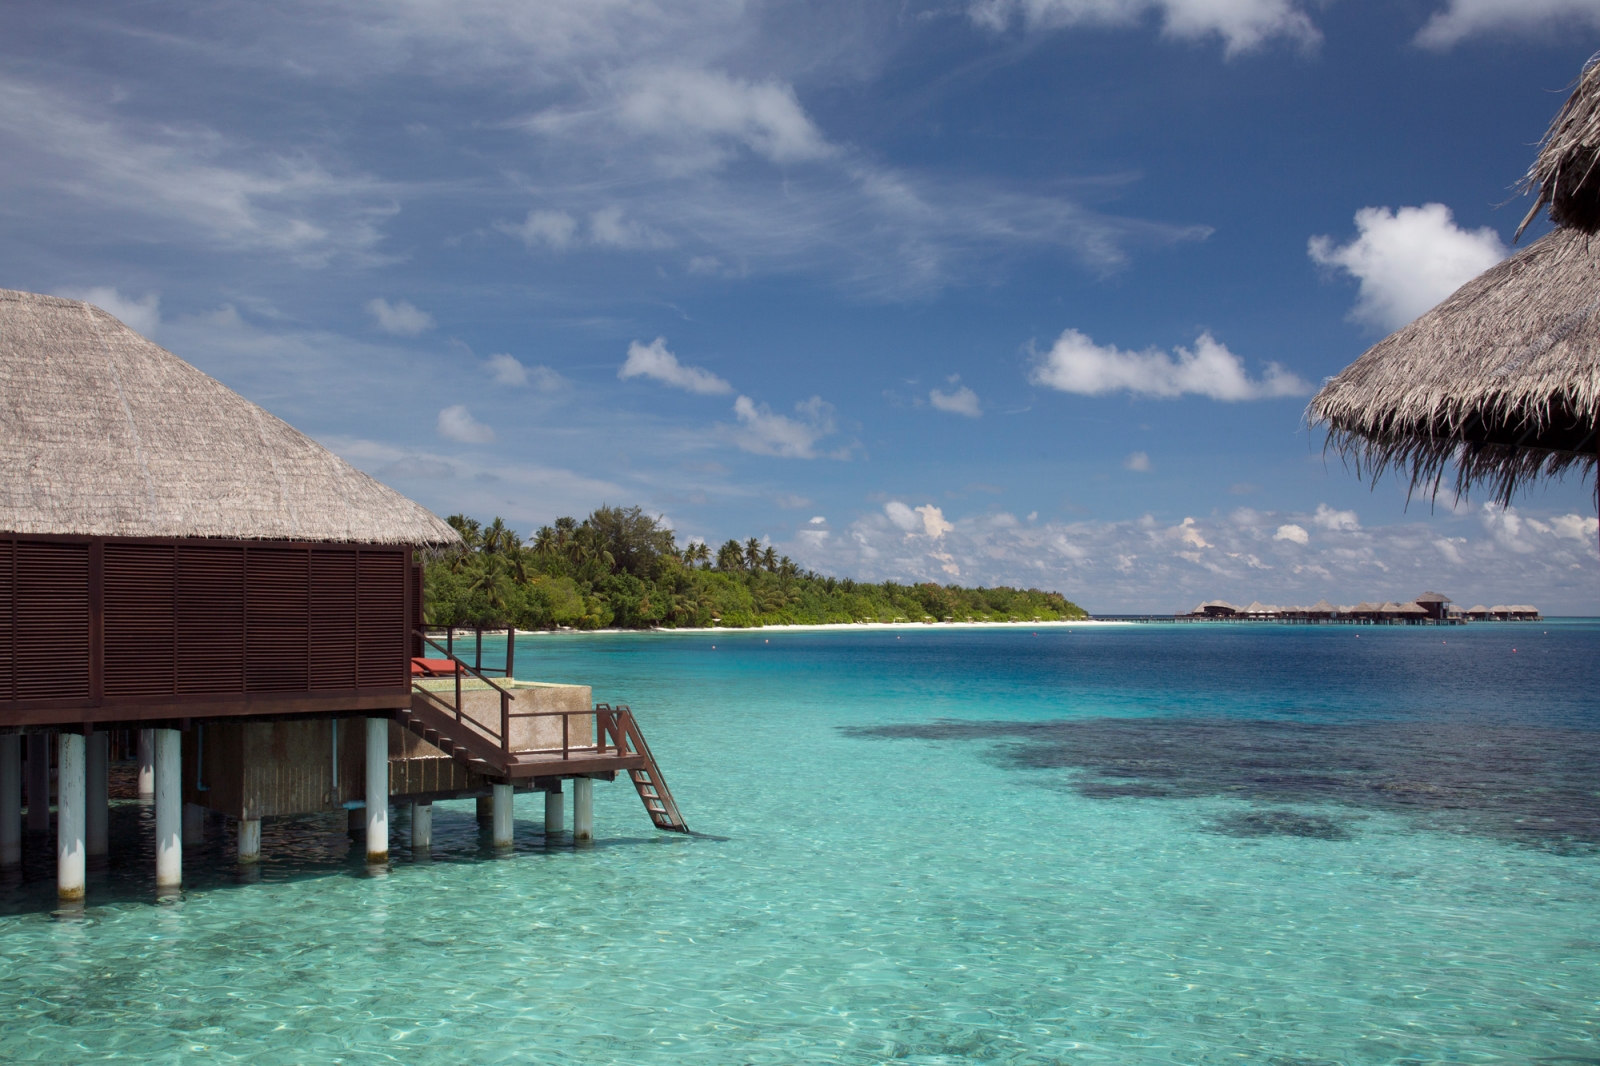 content/hotel/Coco Bodu Hithi/Accommodation/Water Villa/CocoBodu-Acc-WaterVilla-06.jpg